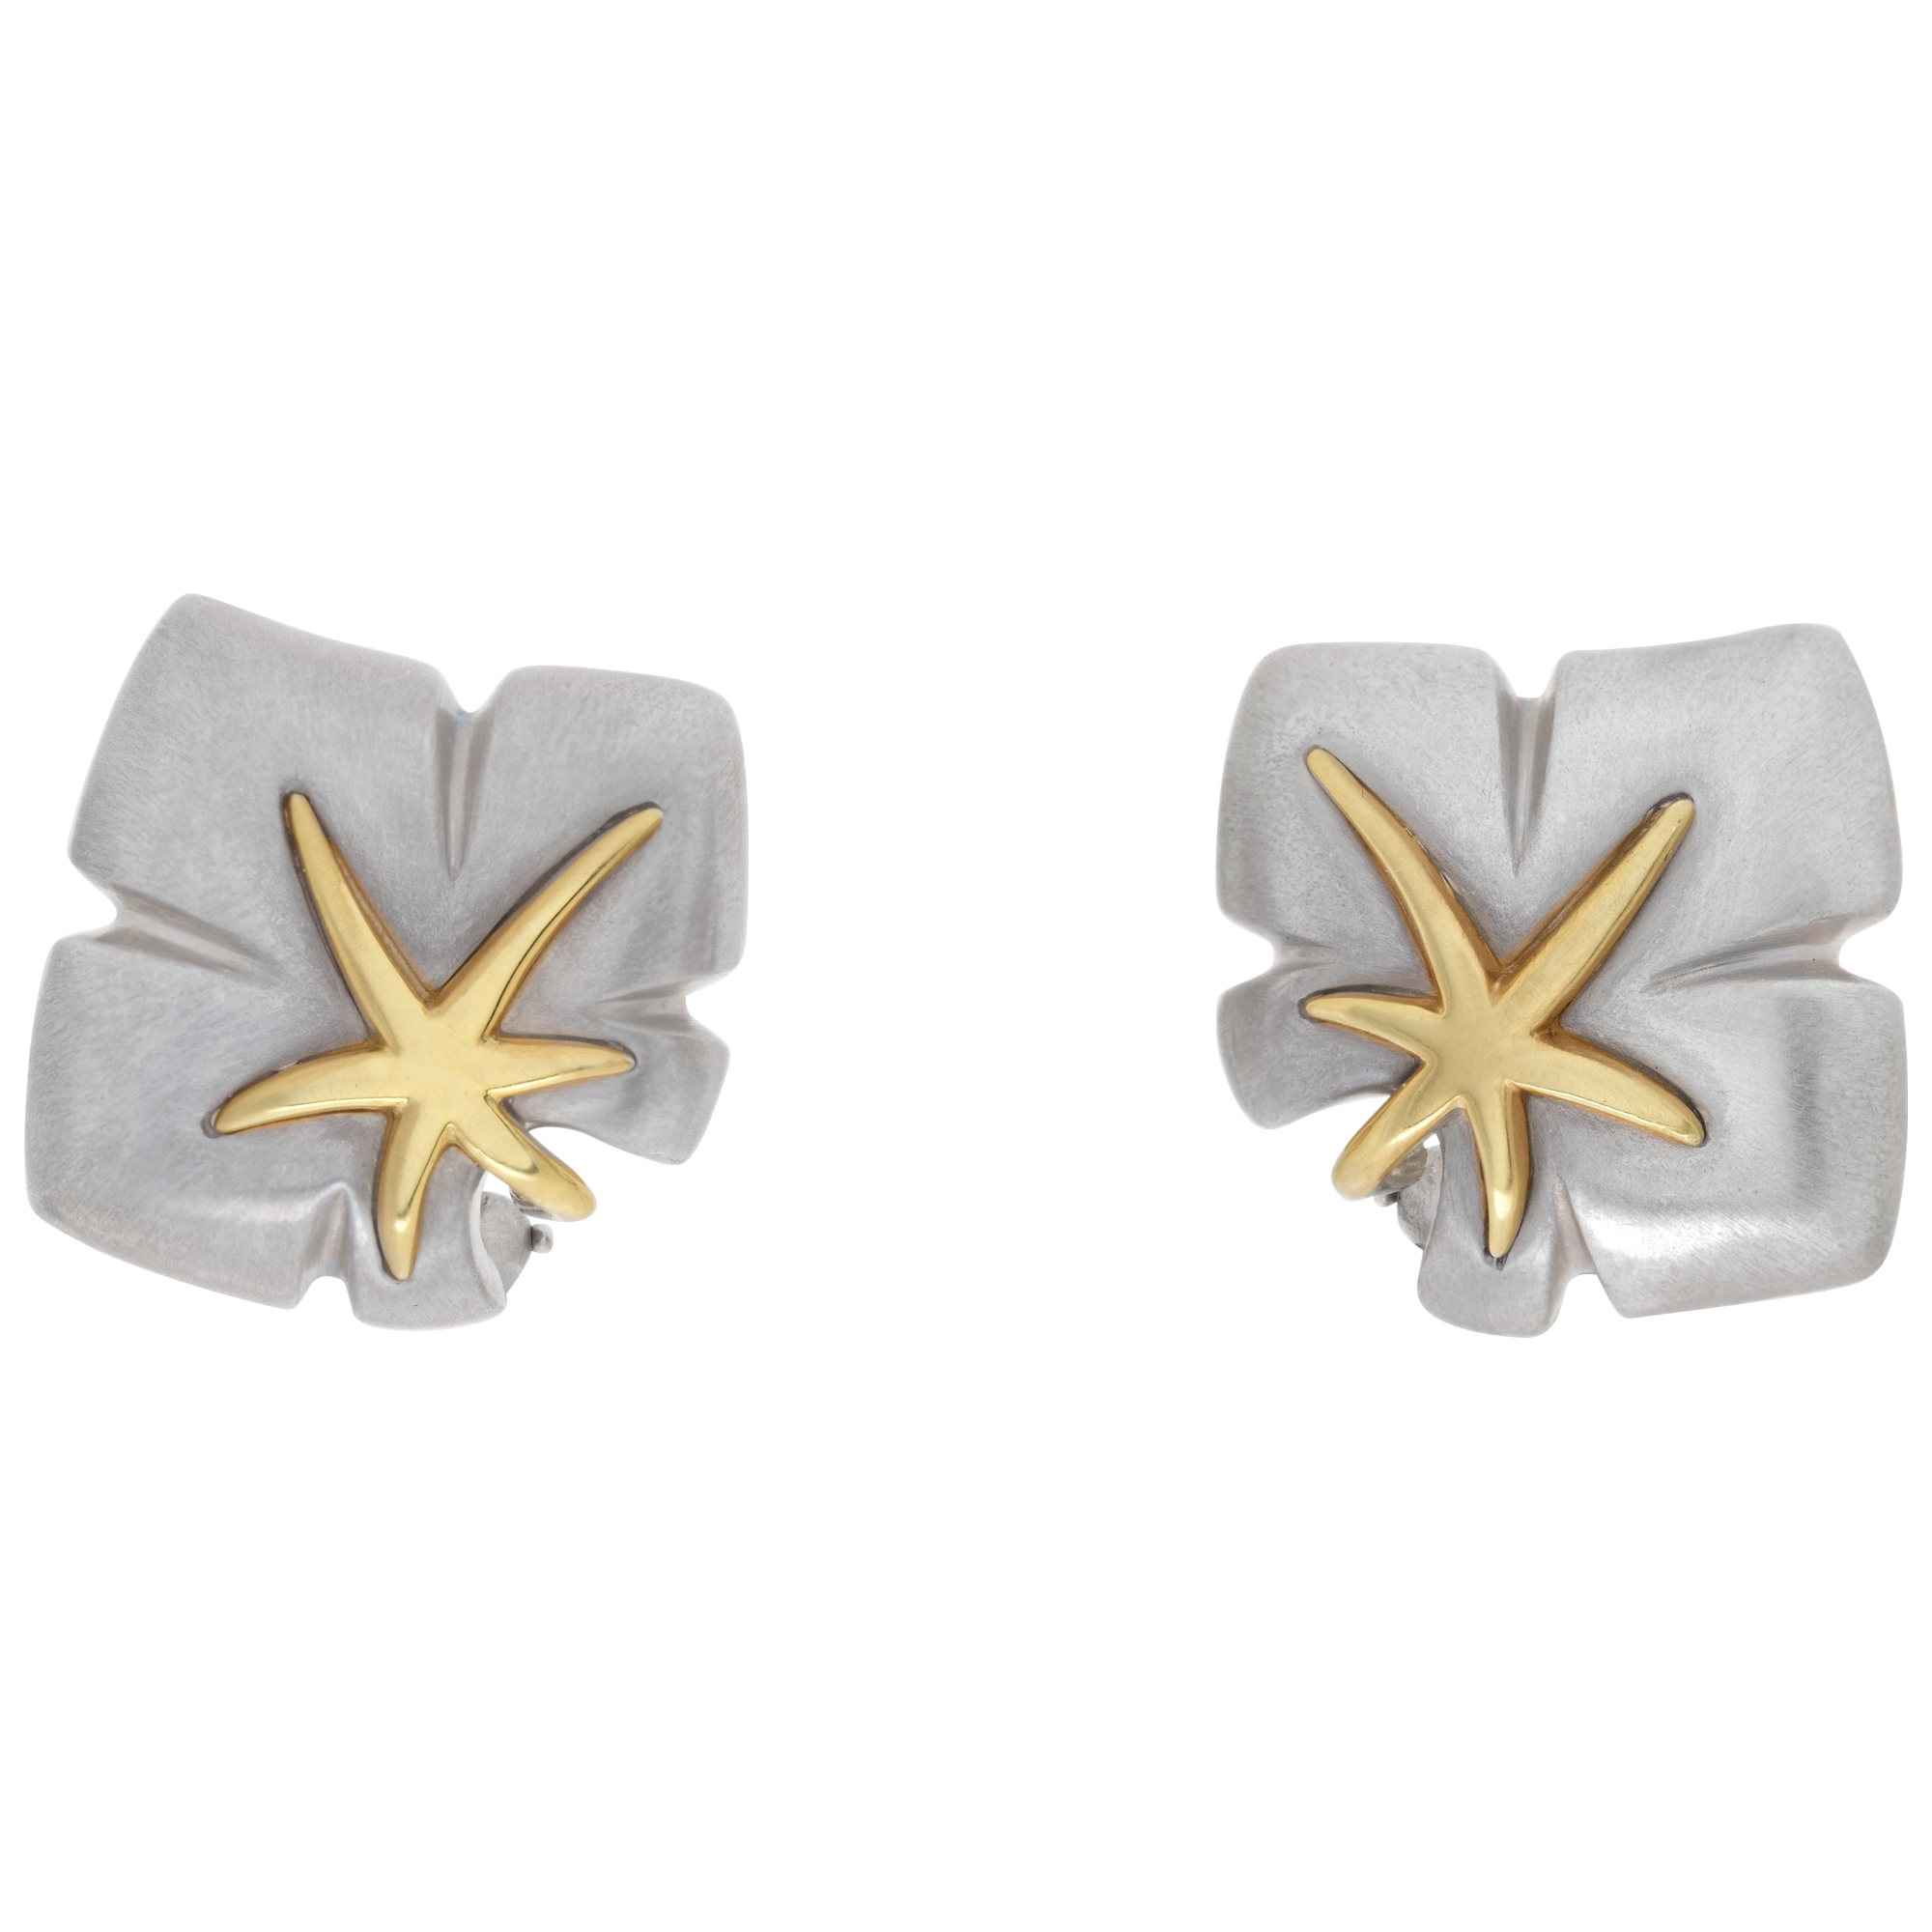 Tiffany & Co. Silver Maple Leaf earrings with 18k accents 22mm x 26mm